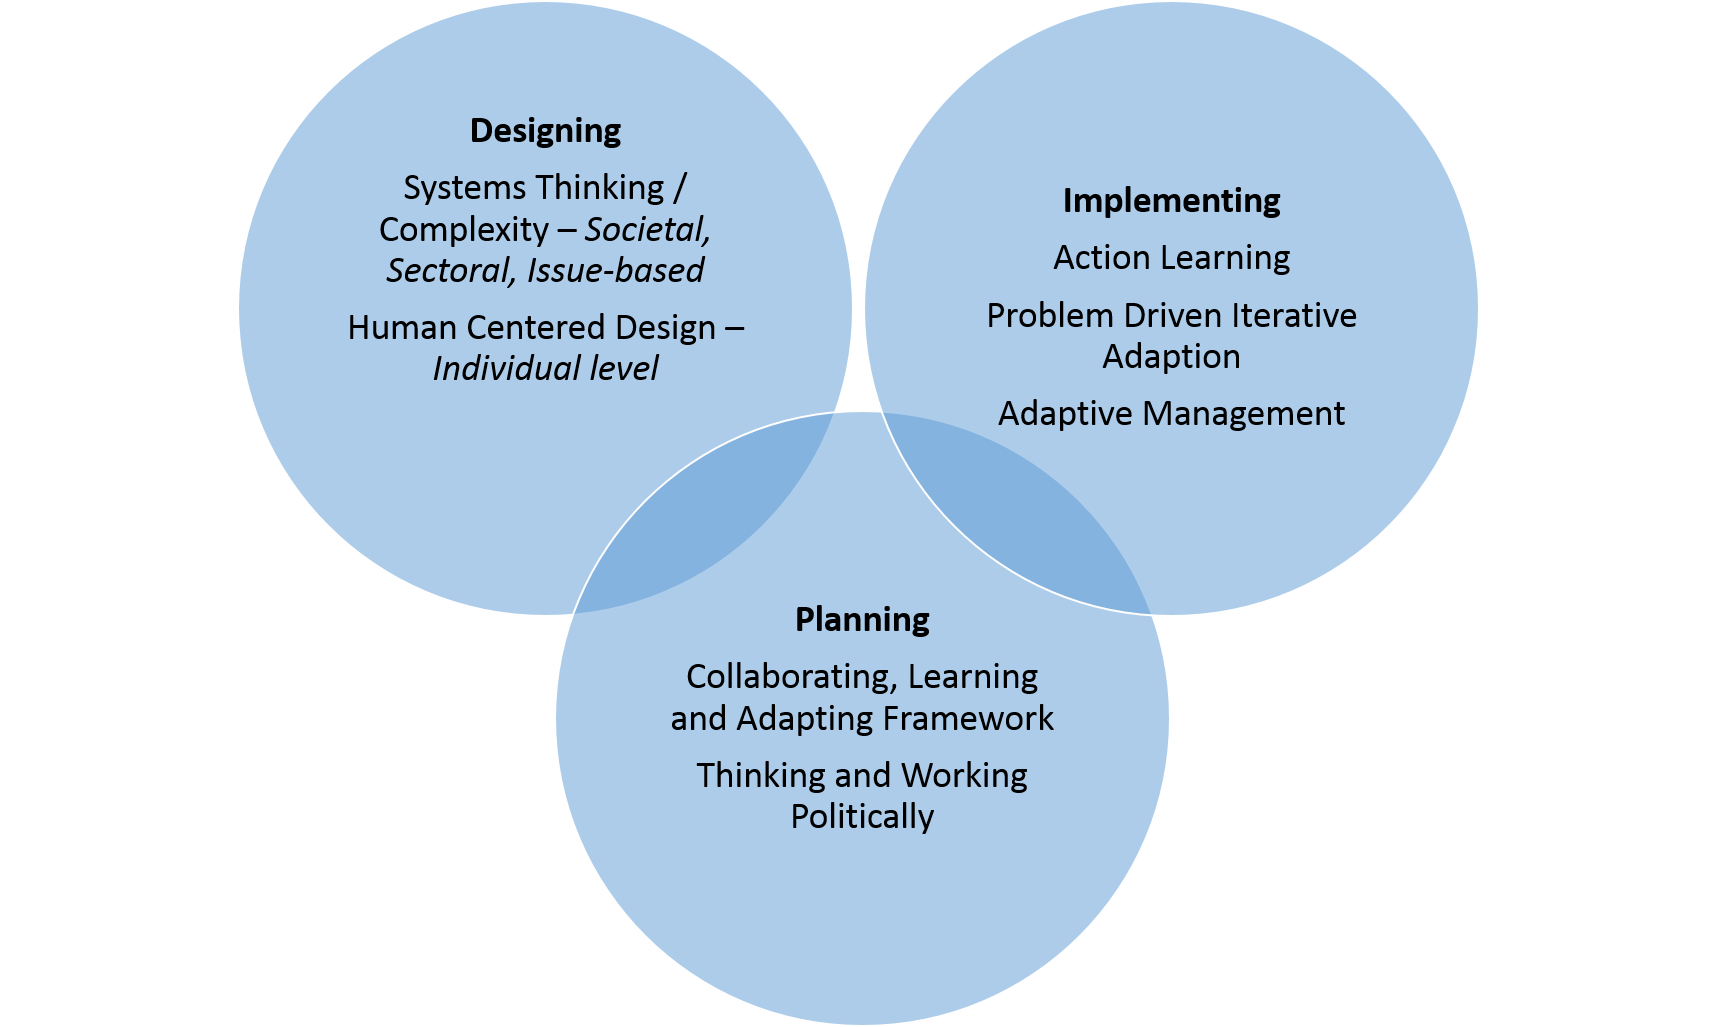 Graphic depicting overlaps between designing, implementing, and planning